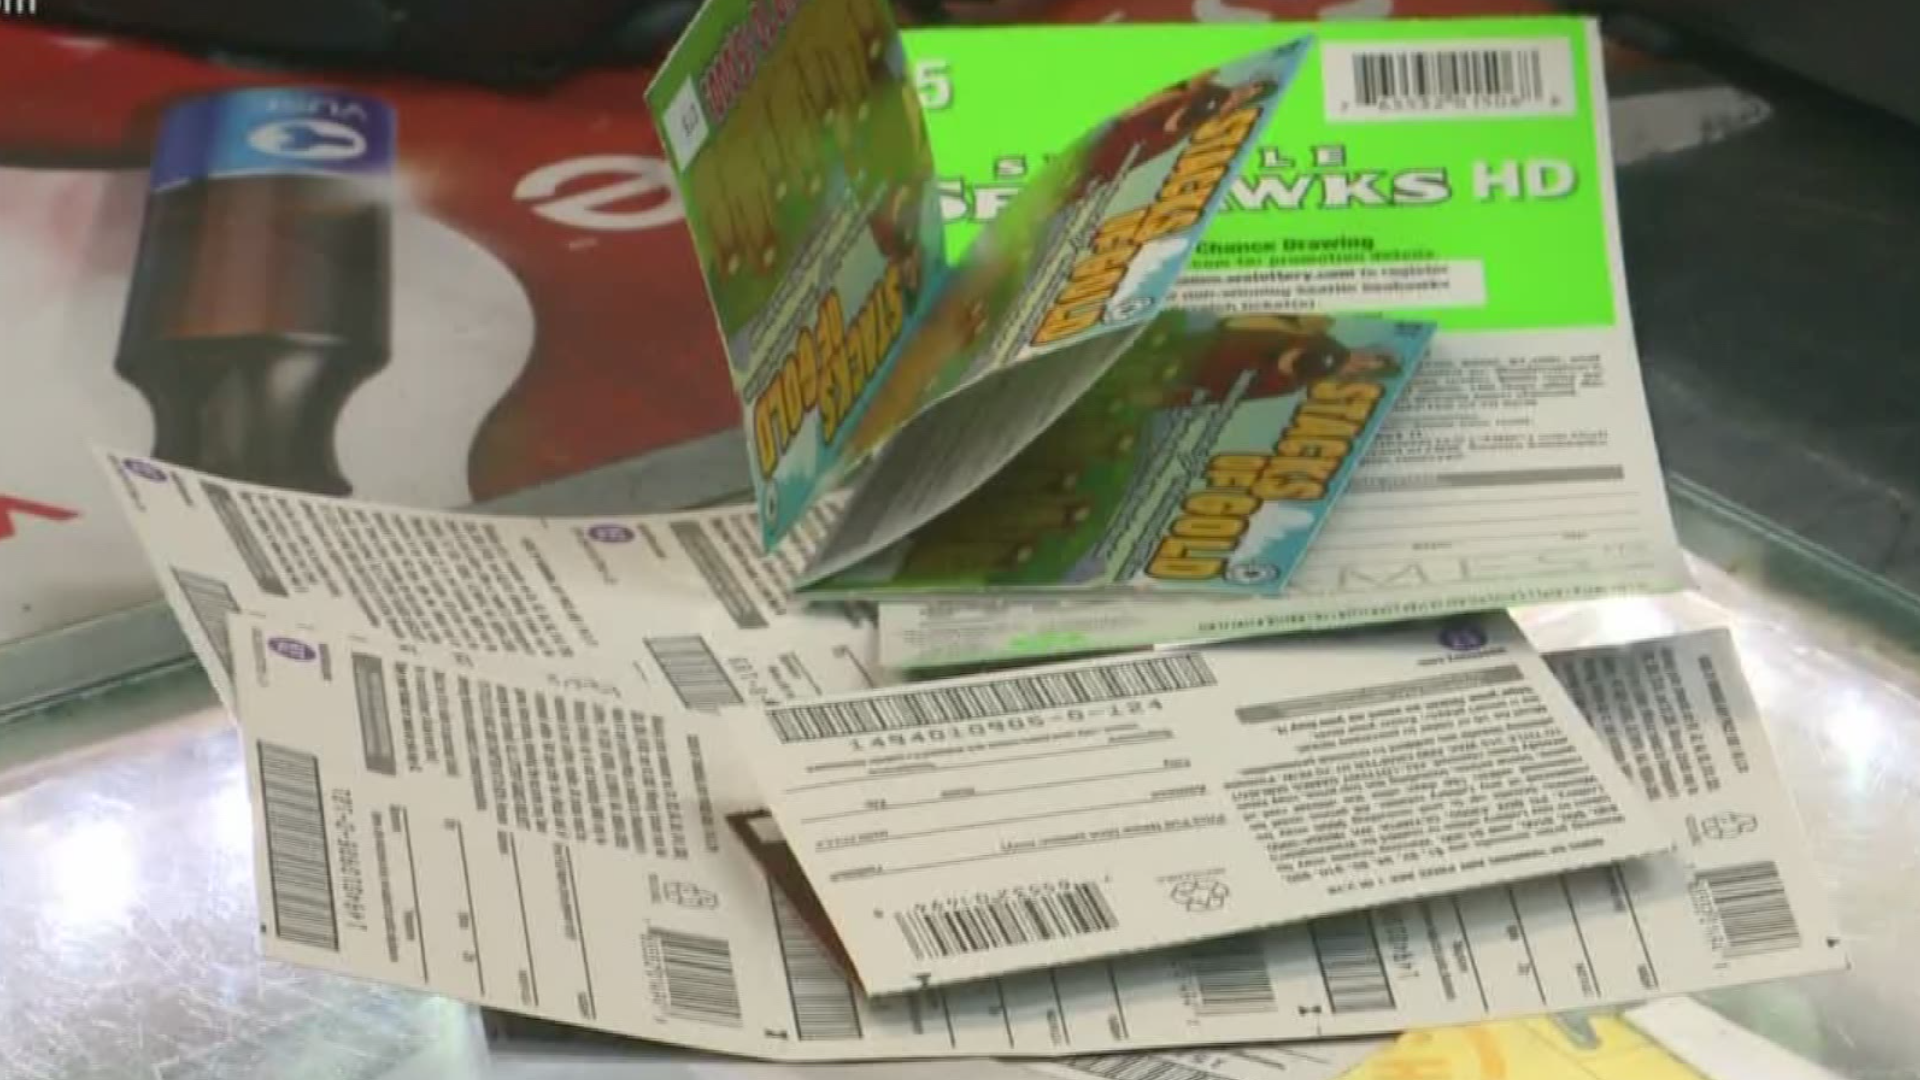 KREM 2 Investigative Reporter Whitney Ward explores how the state lottery does not require retailers to pull games off the shelves once a jackpot has been won, saying smaller prizes may still be available.